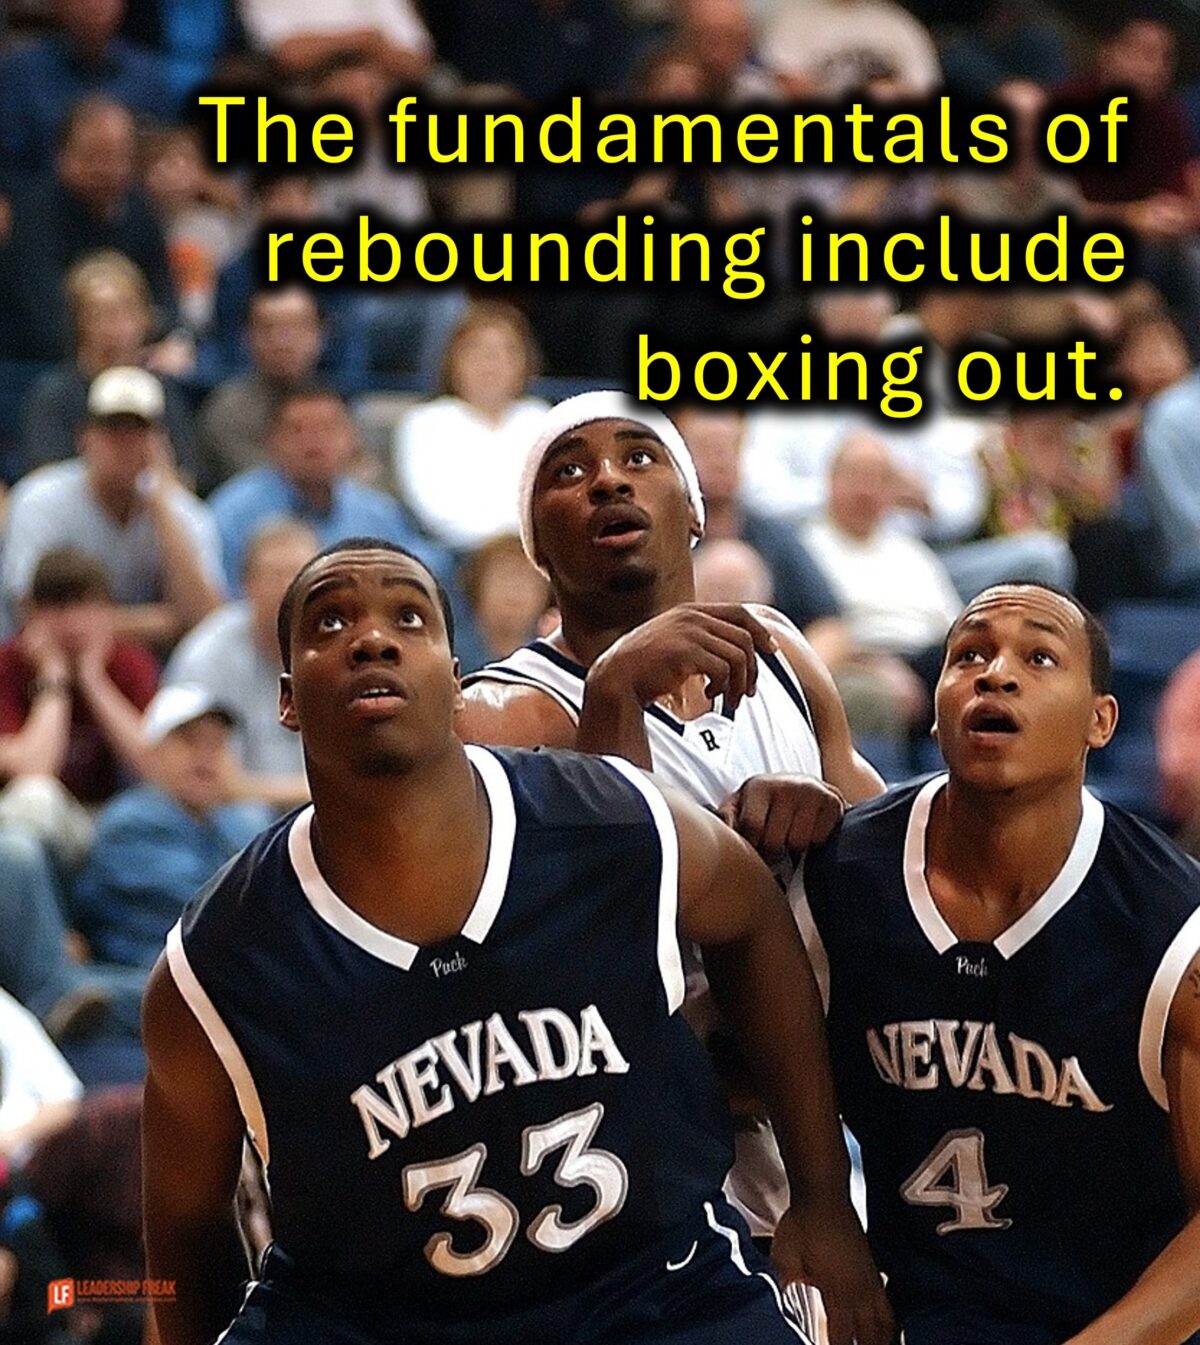 The Fundamentals Make You Great